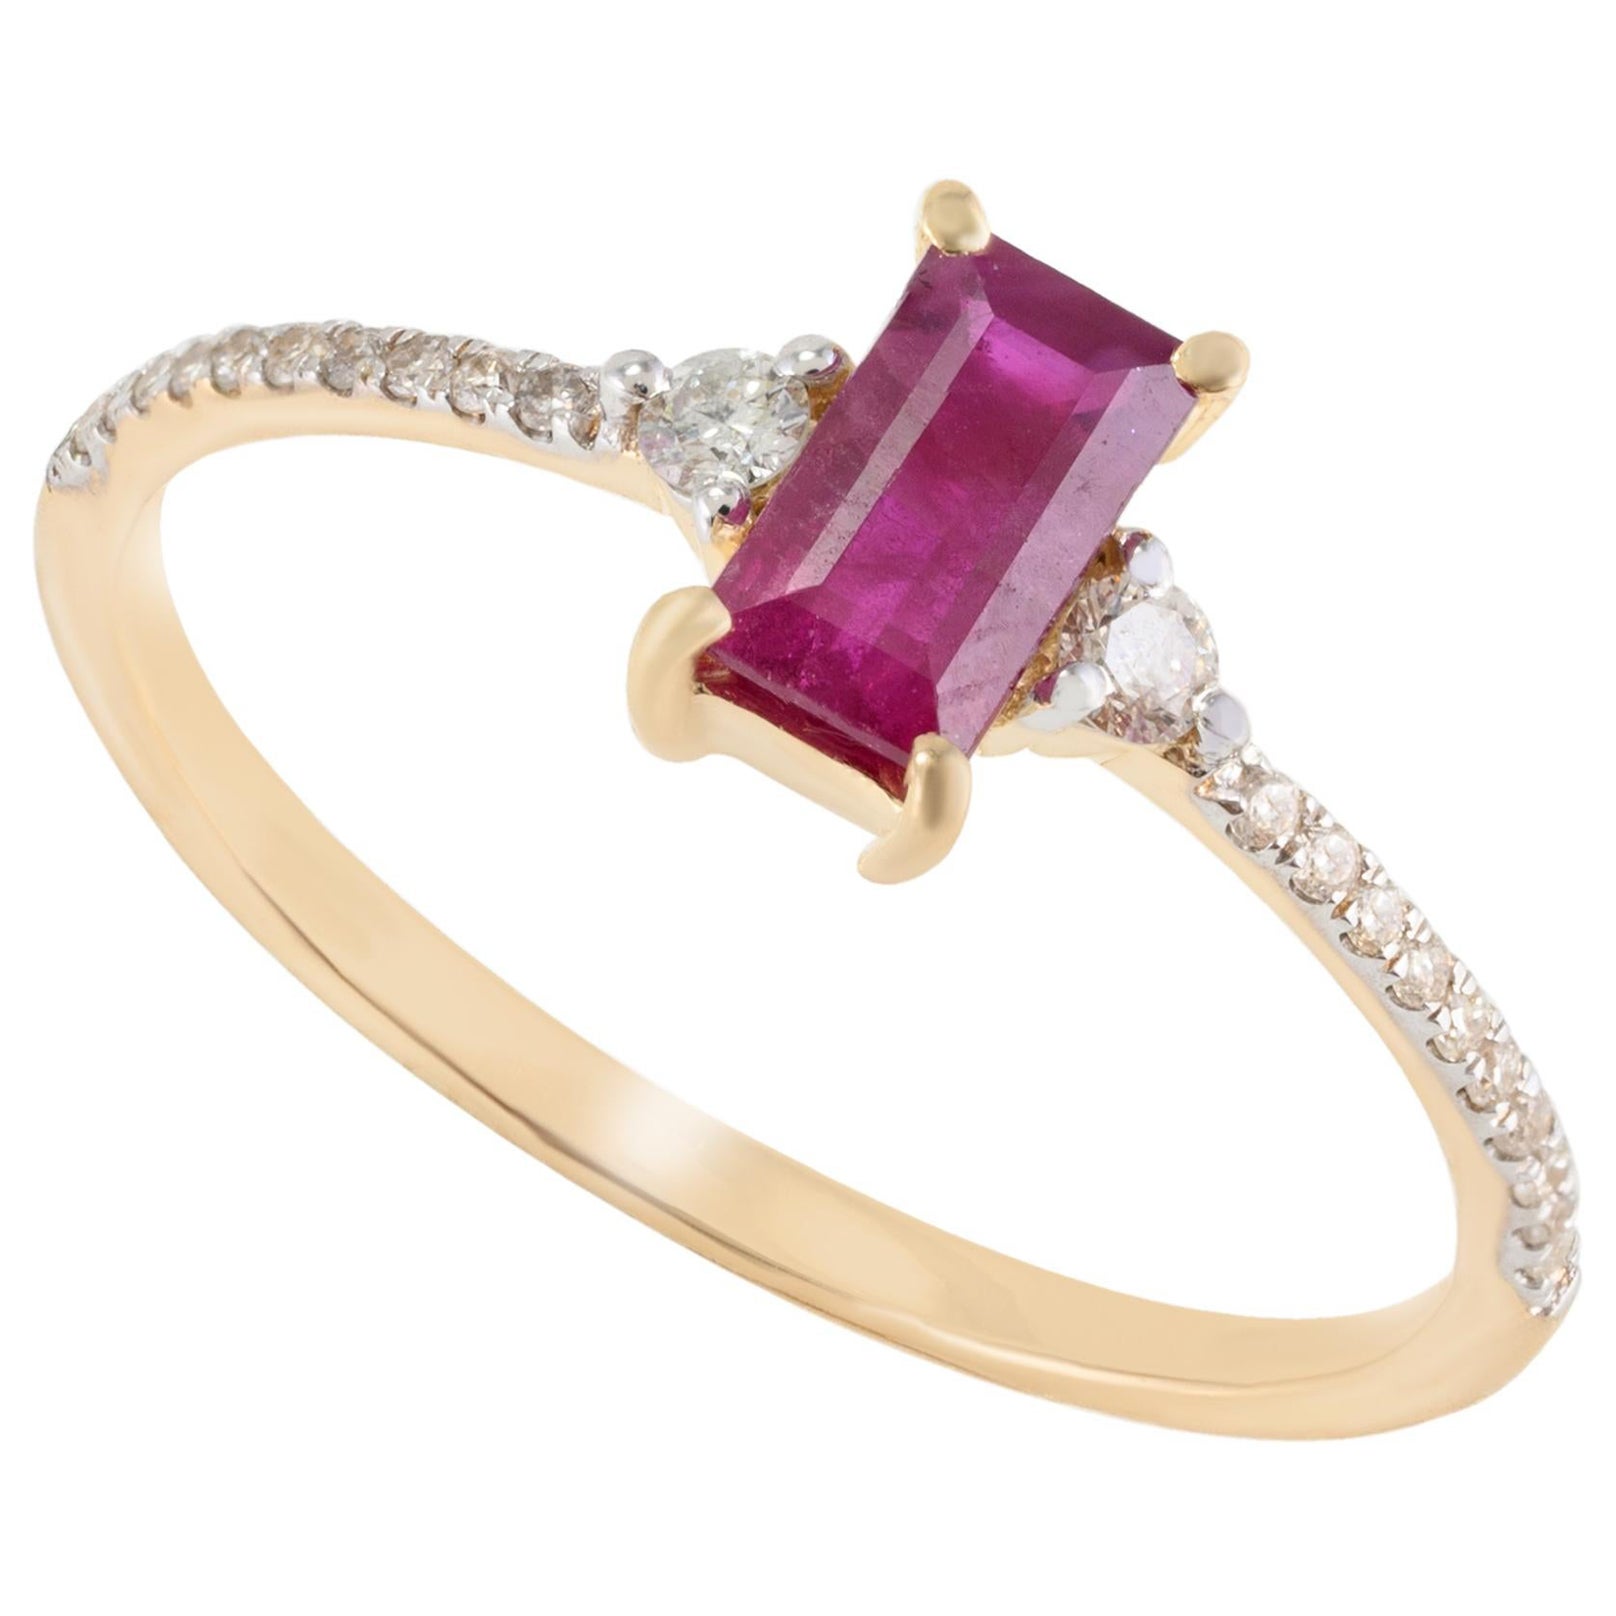 For Sale:  Baguette Cut Ruby and Diamond Stacking Ring in 14k Solid Yellow Gold For Her